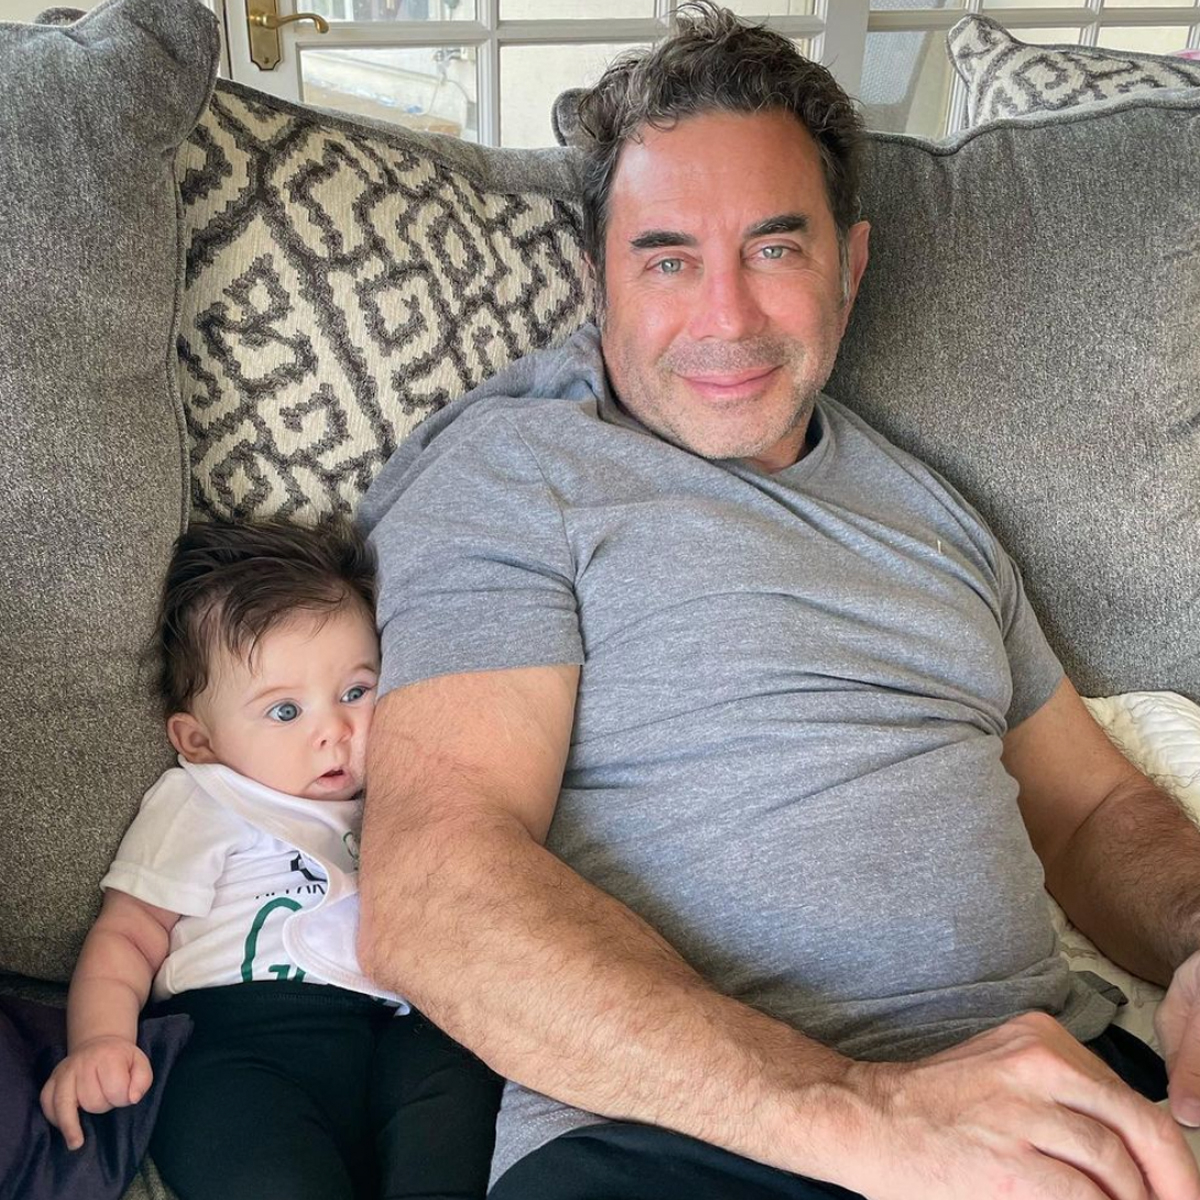 See Dr. Paul Nassif's first moments with baby Paulina